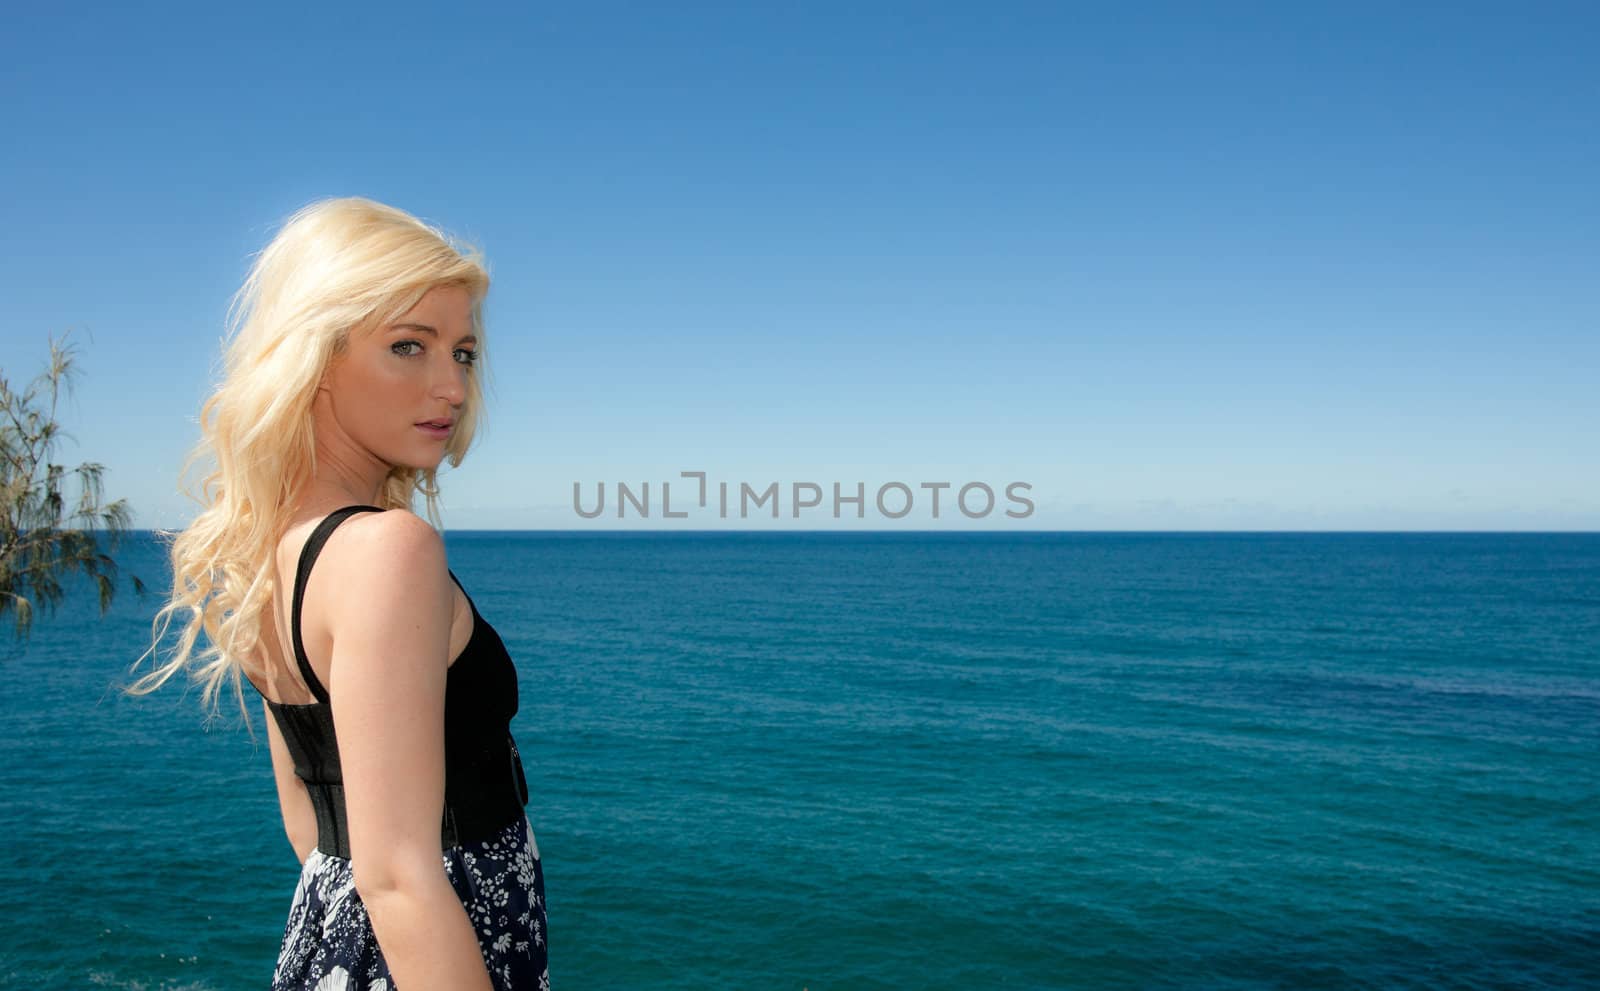 young woman looks over blue ocean by clearviewstock